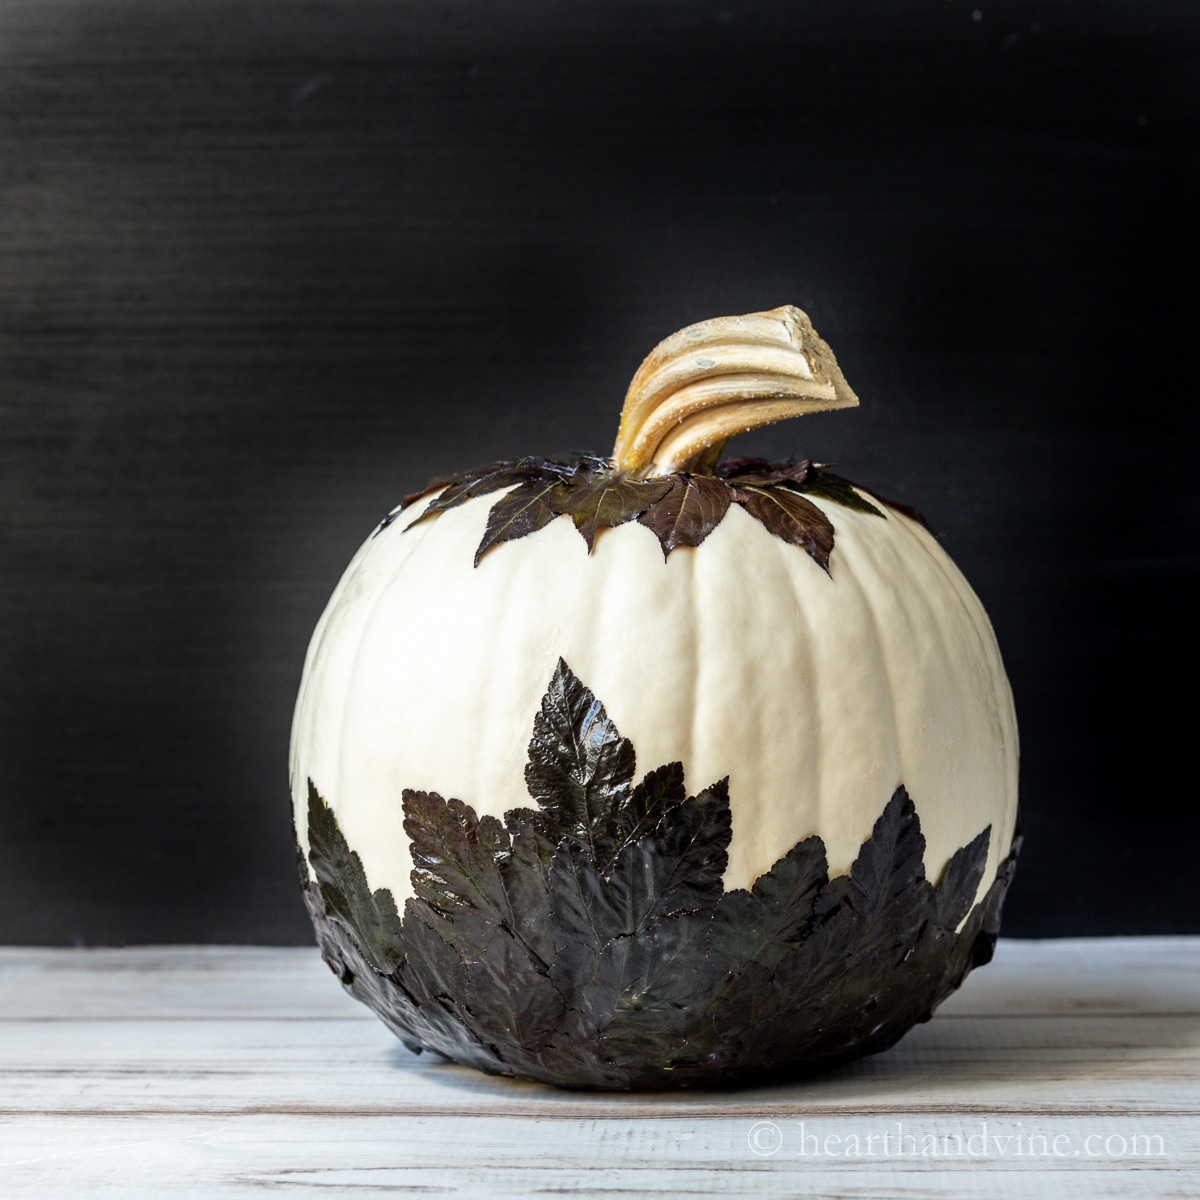 A white pumpkin is decorated with bronze leaves for the fall.